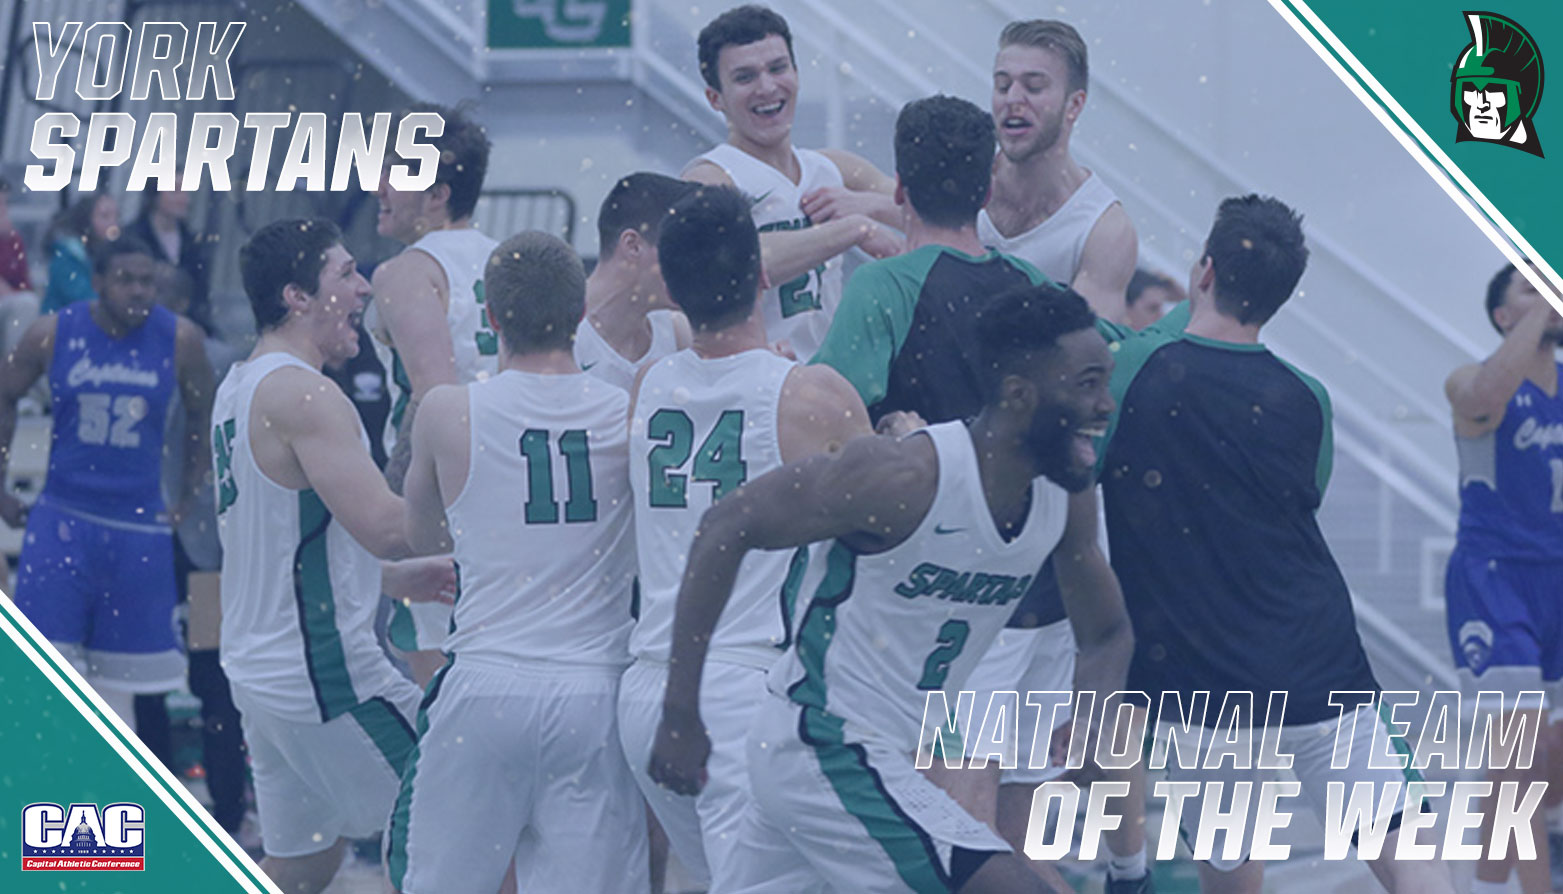 York Spartans Named NABC Men's Basketball Division III Team of the Week